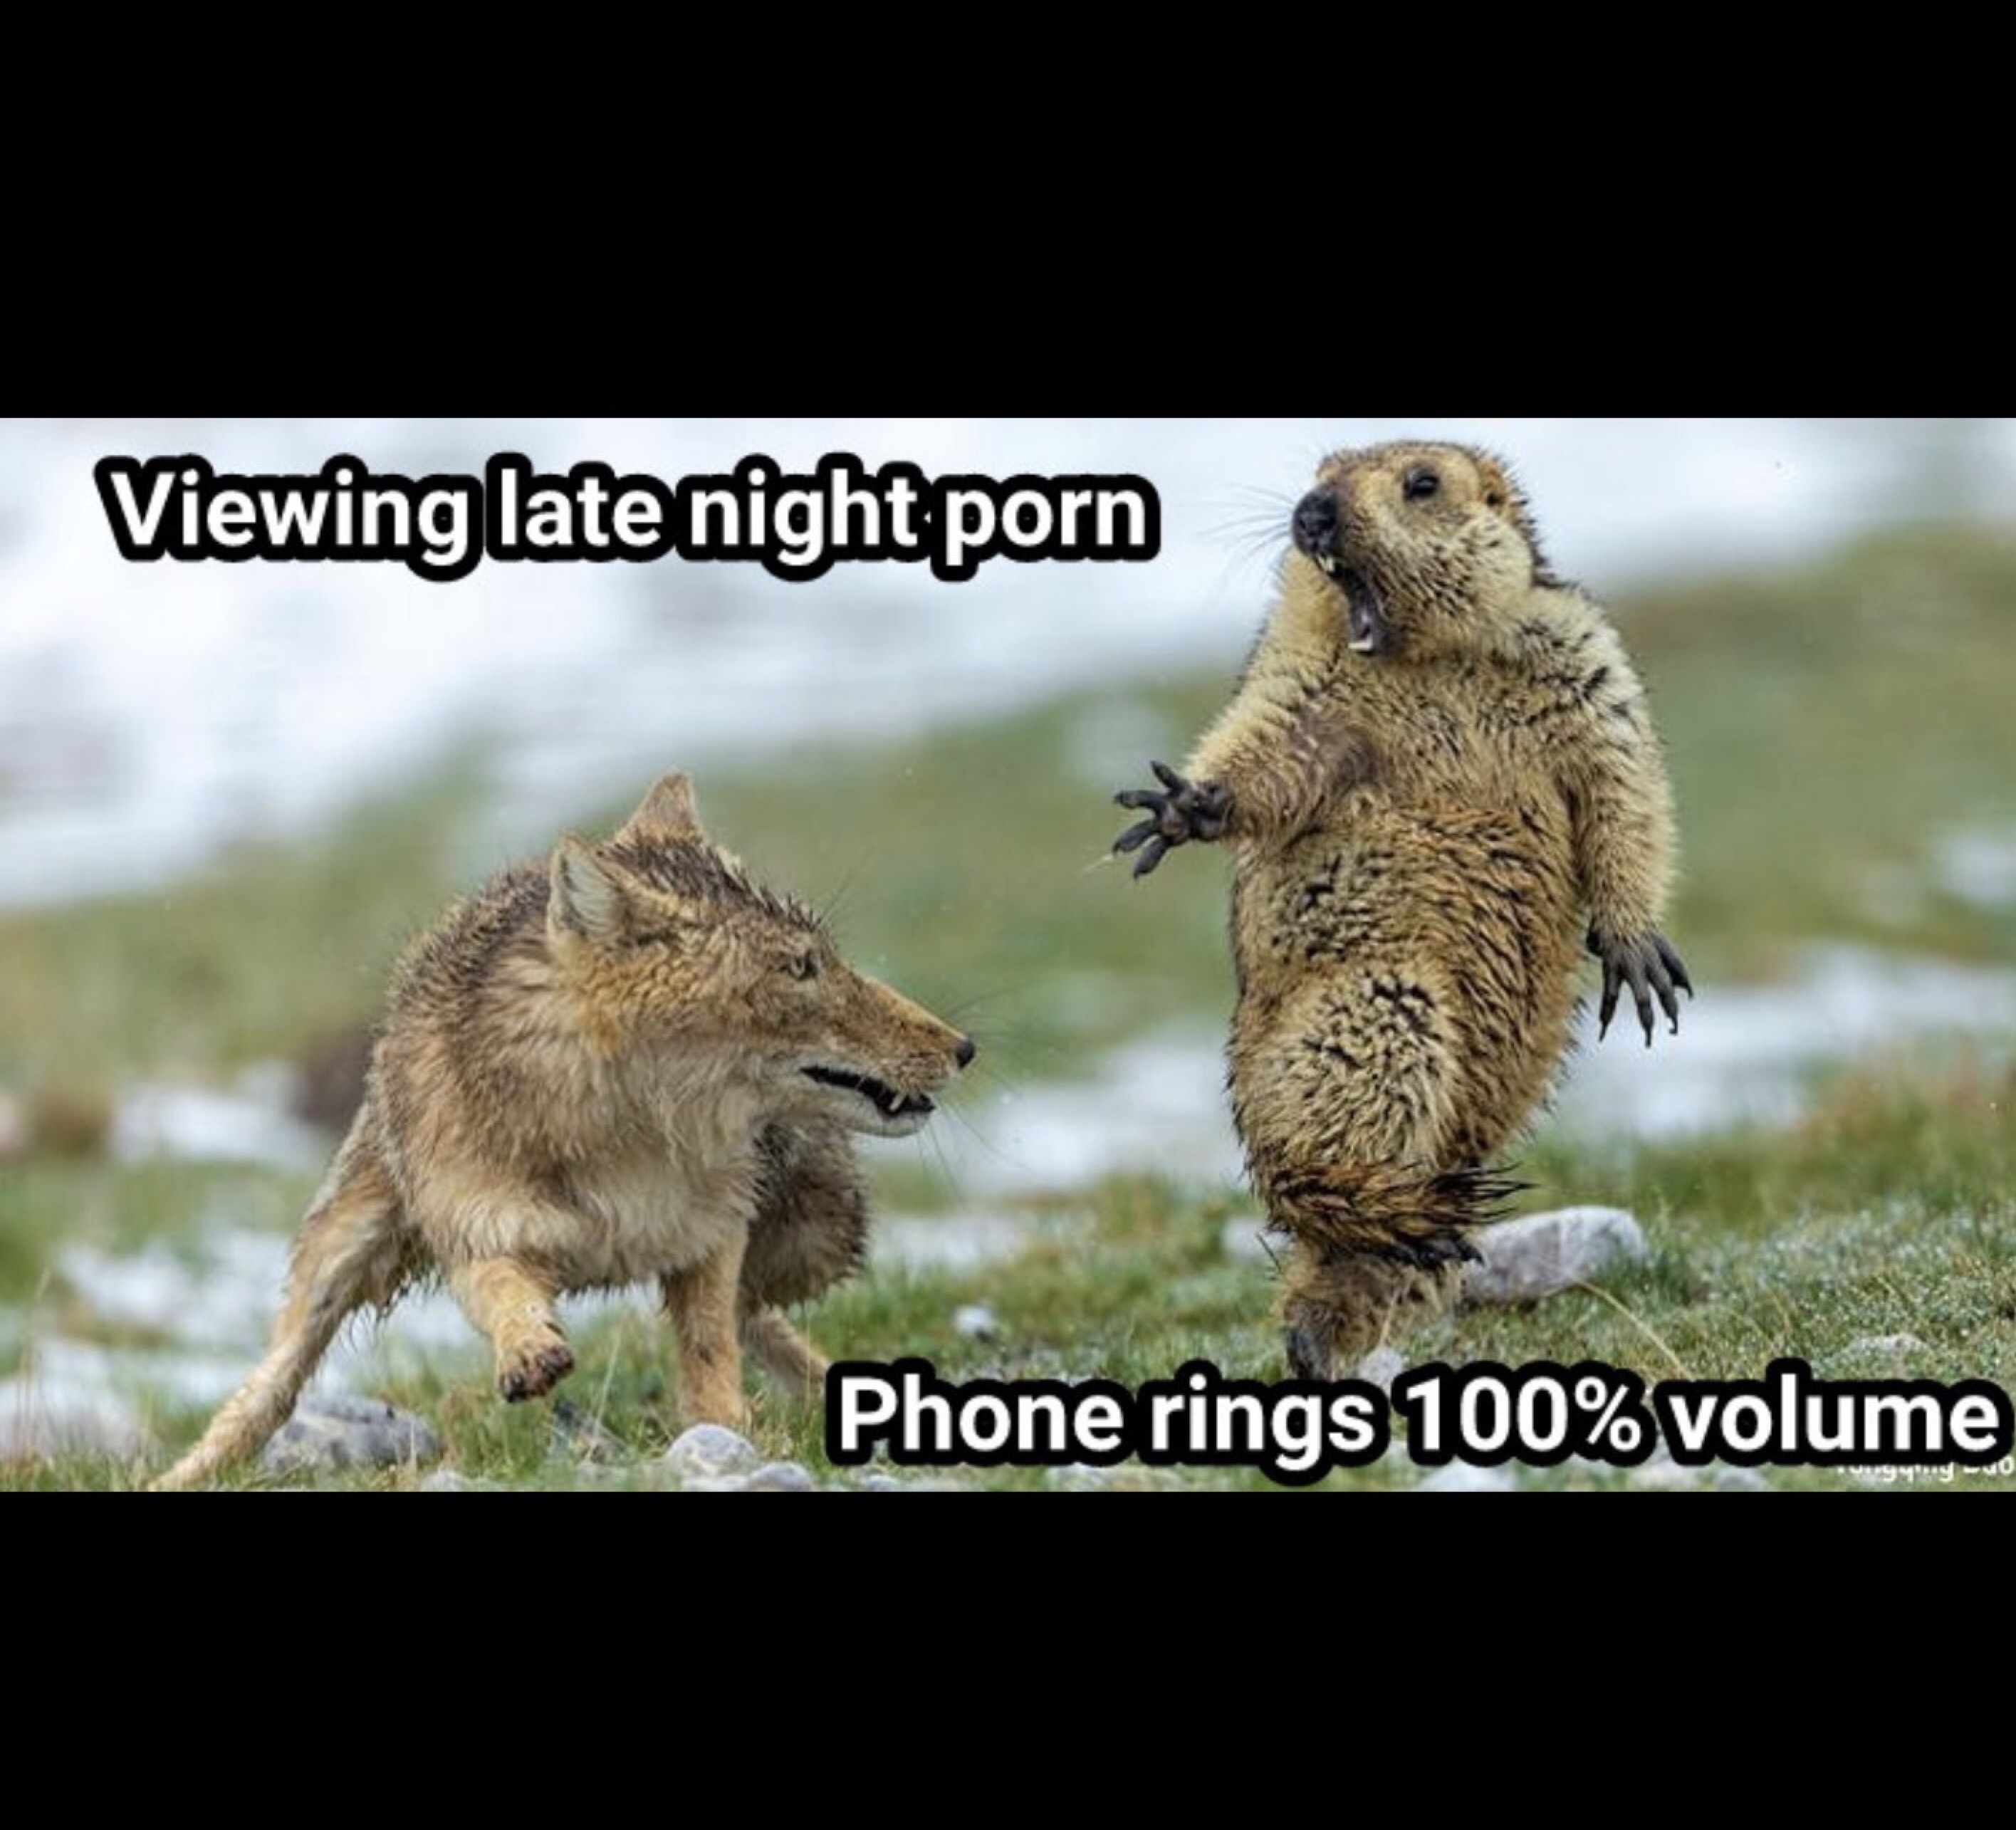 marmot and fox - Viewing late night porn Phone rings 100% volume